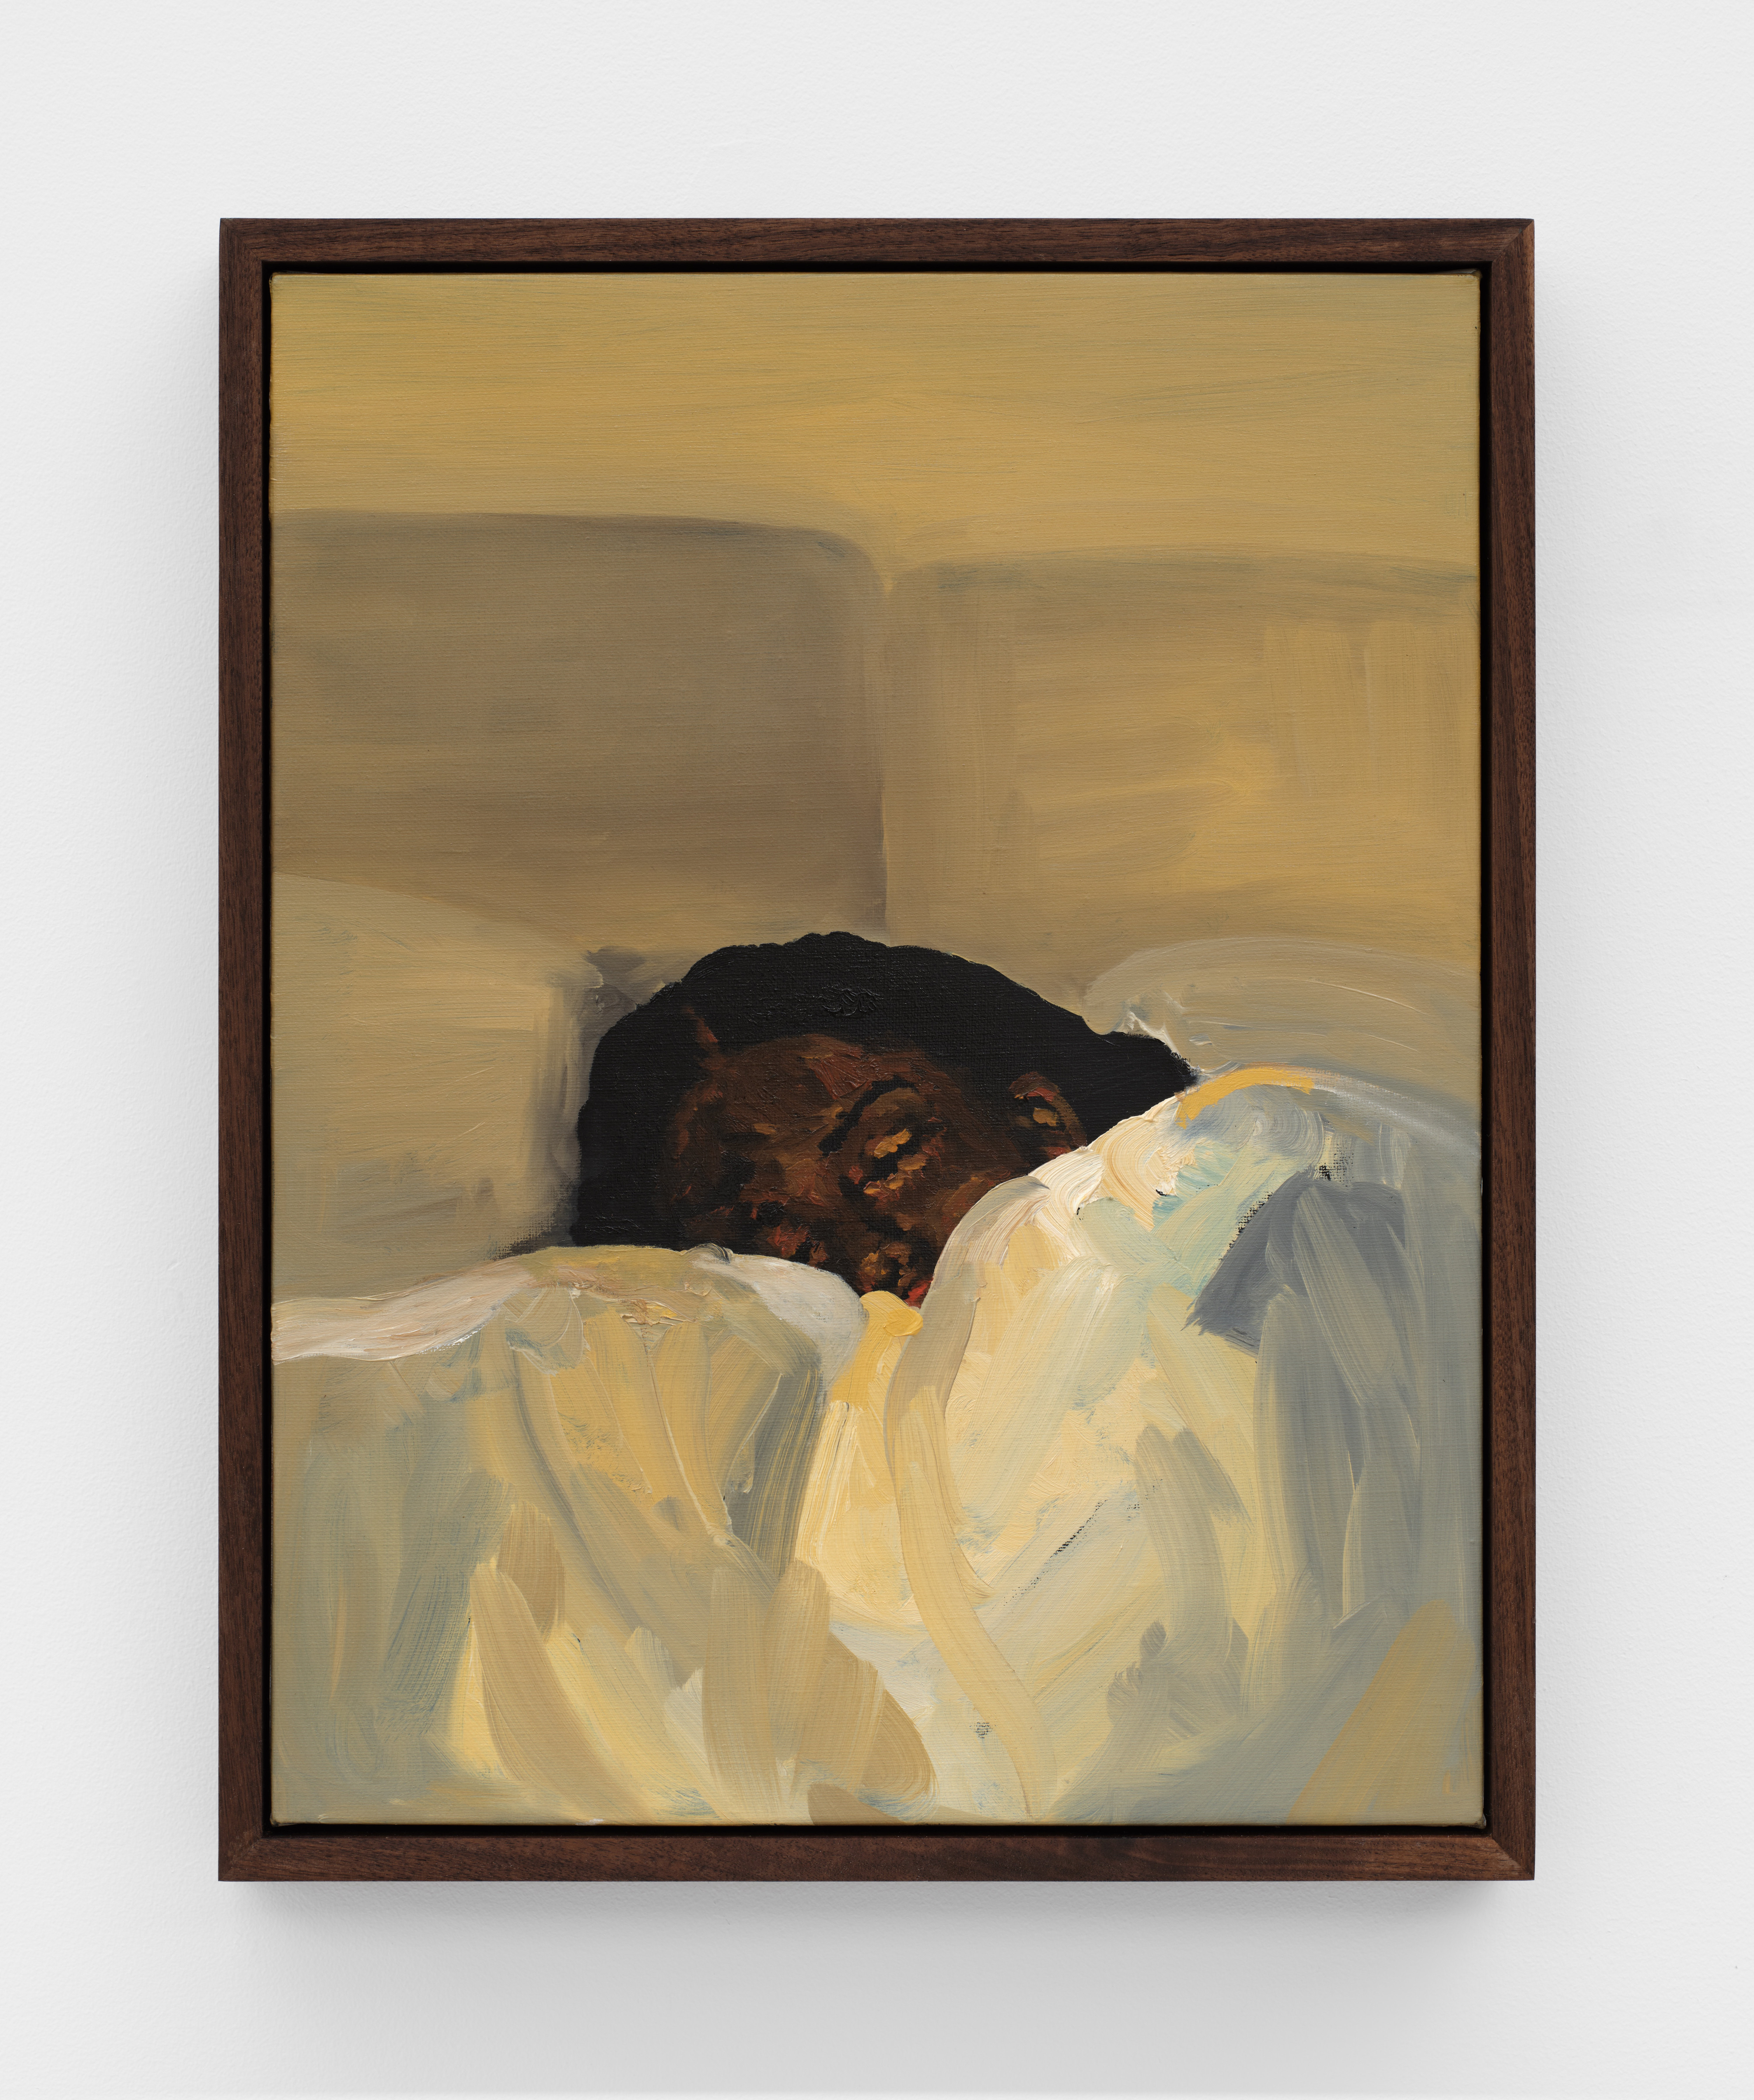 A woman sleeps buried in pillows and blankets in soft yellow hues. 